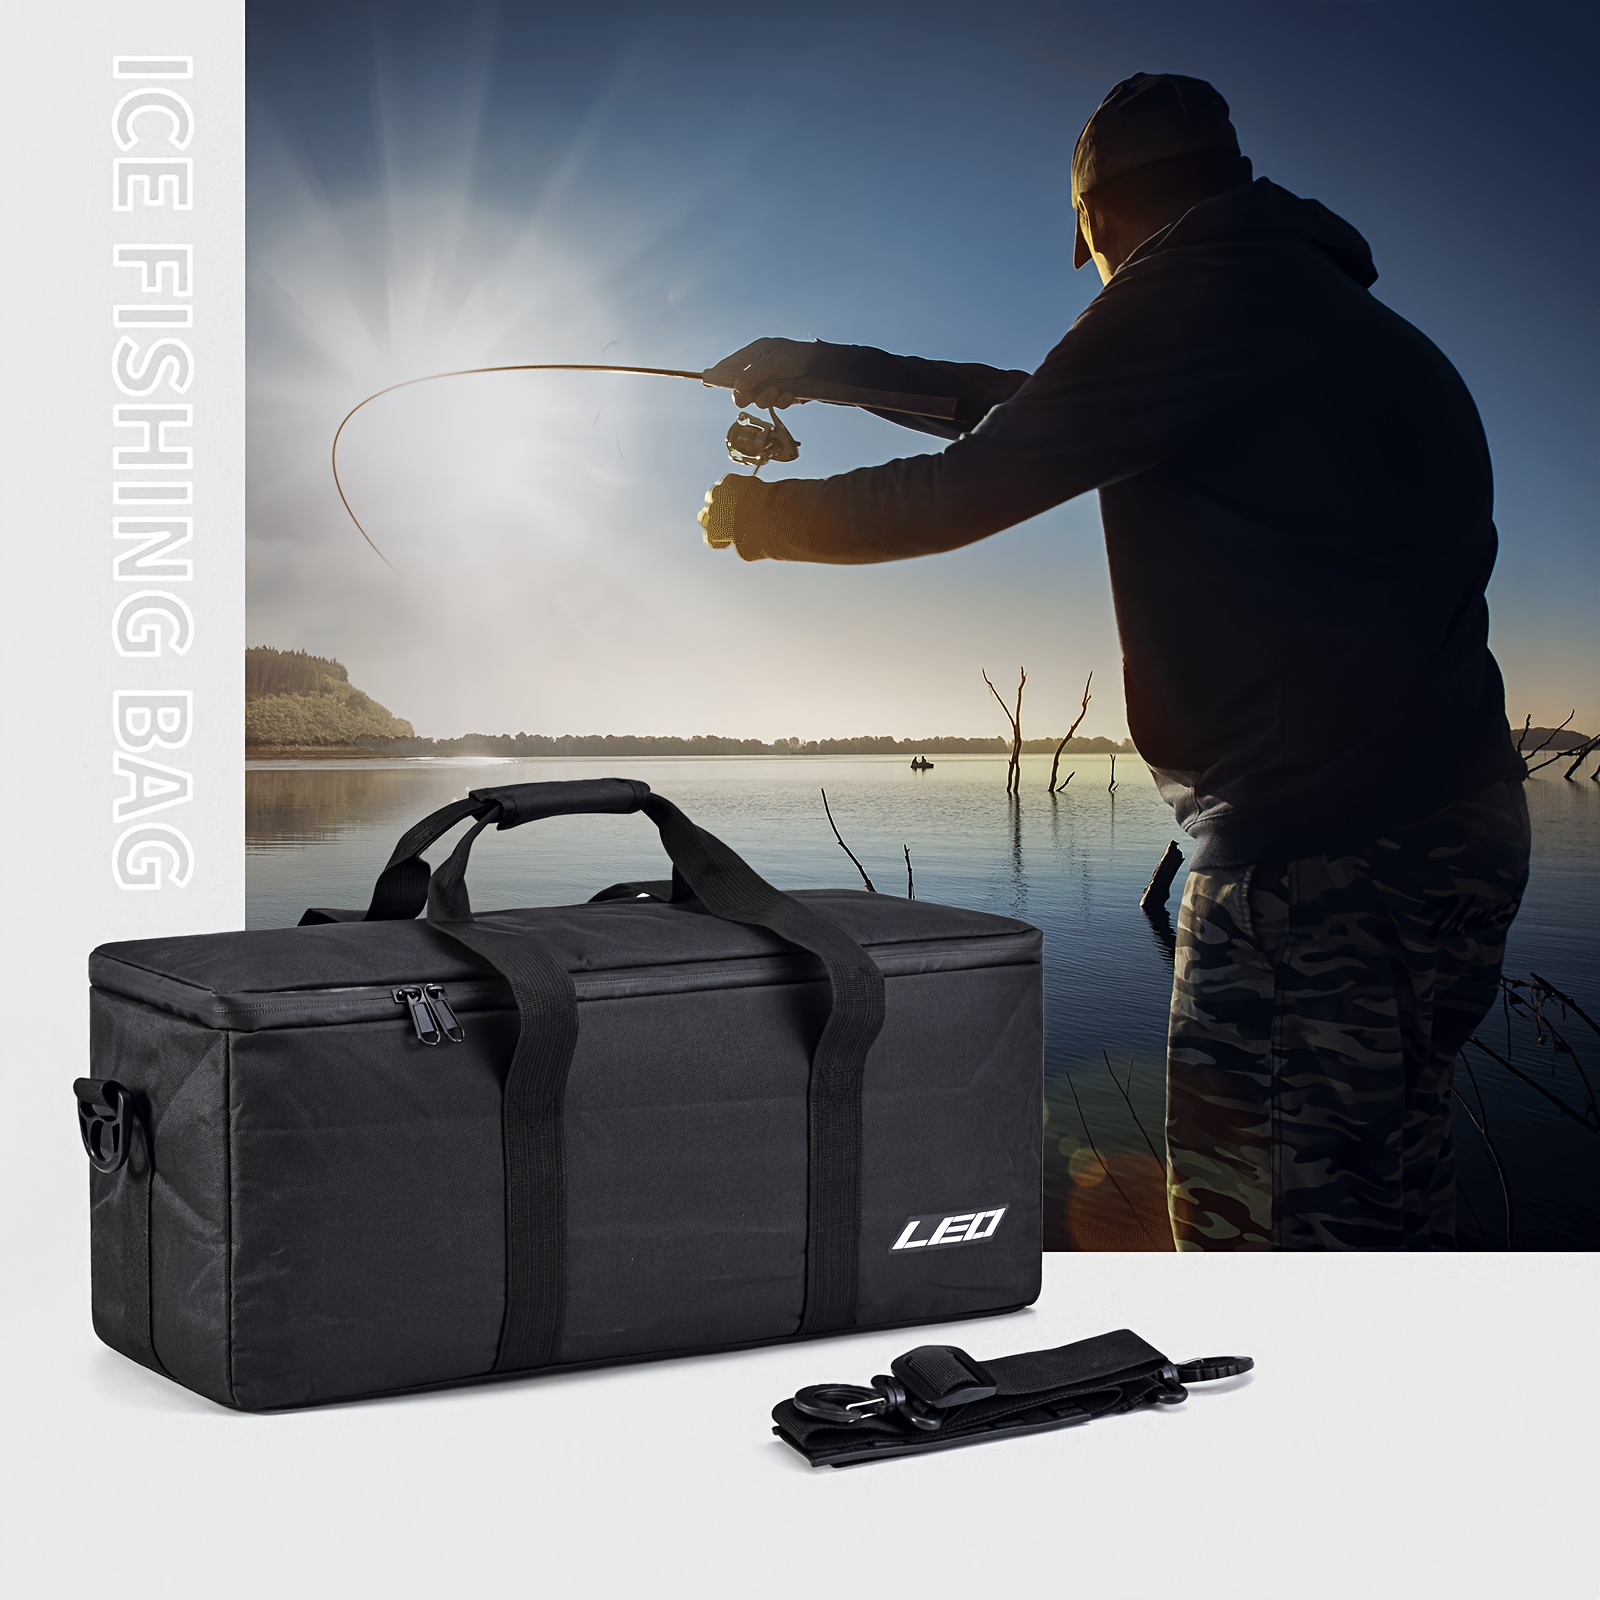  LEOFISHING Portable Folding Fishing Pole Bag  3.94ft/4.59ft/5.25ft Fishing Rod and Reel Protective Case Fishing Tackle  Storage Bags Carry Organizer Outdoor for Fishing 3 Size (Big(160cm/5.25ft))  : Sports & Outdoors